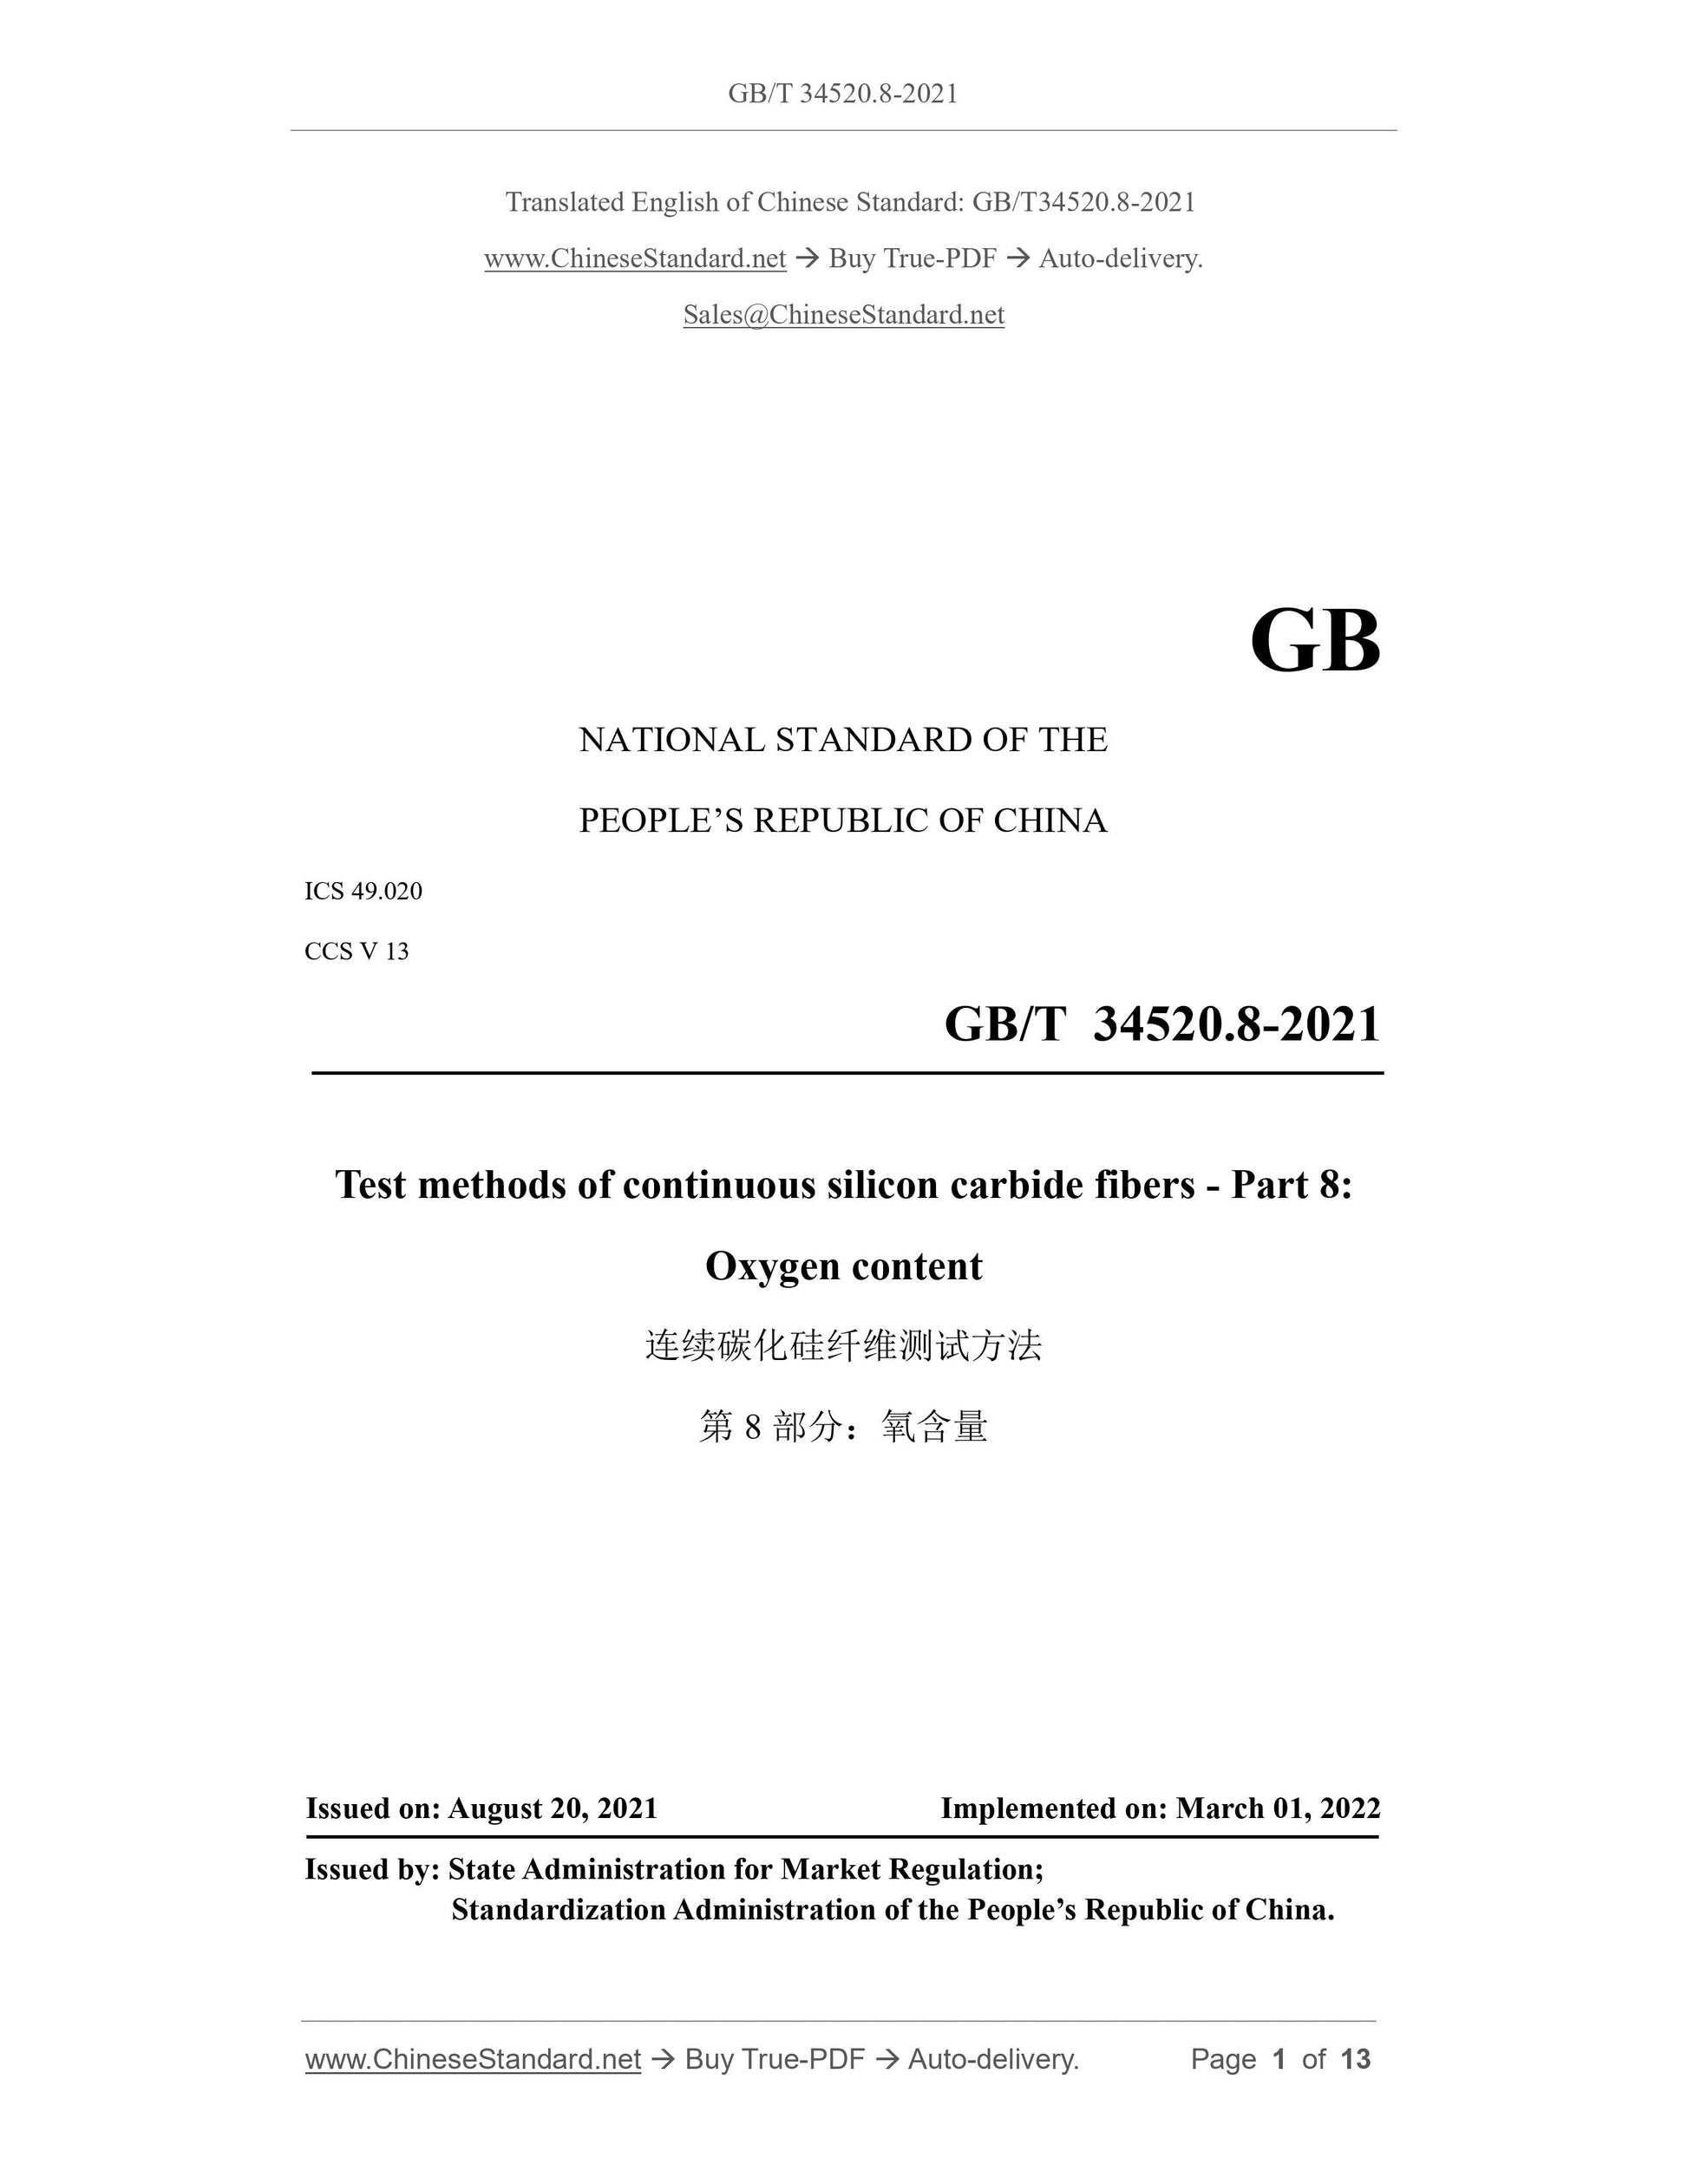 GB/T 34520.8-2021 Page 1